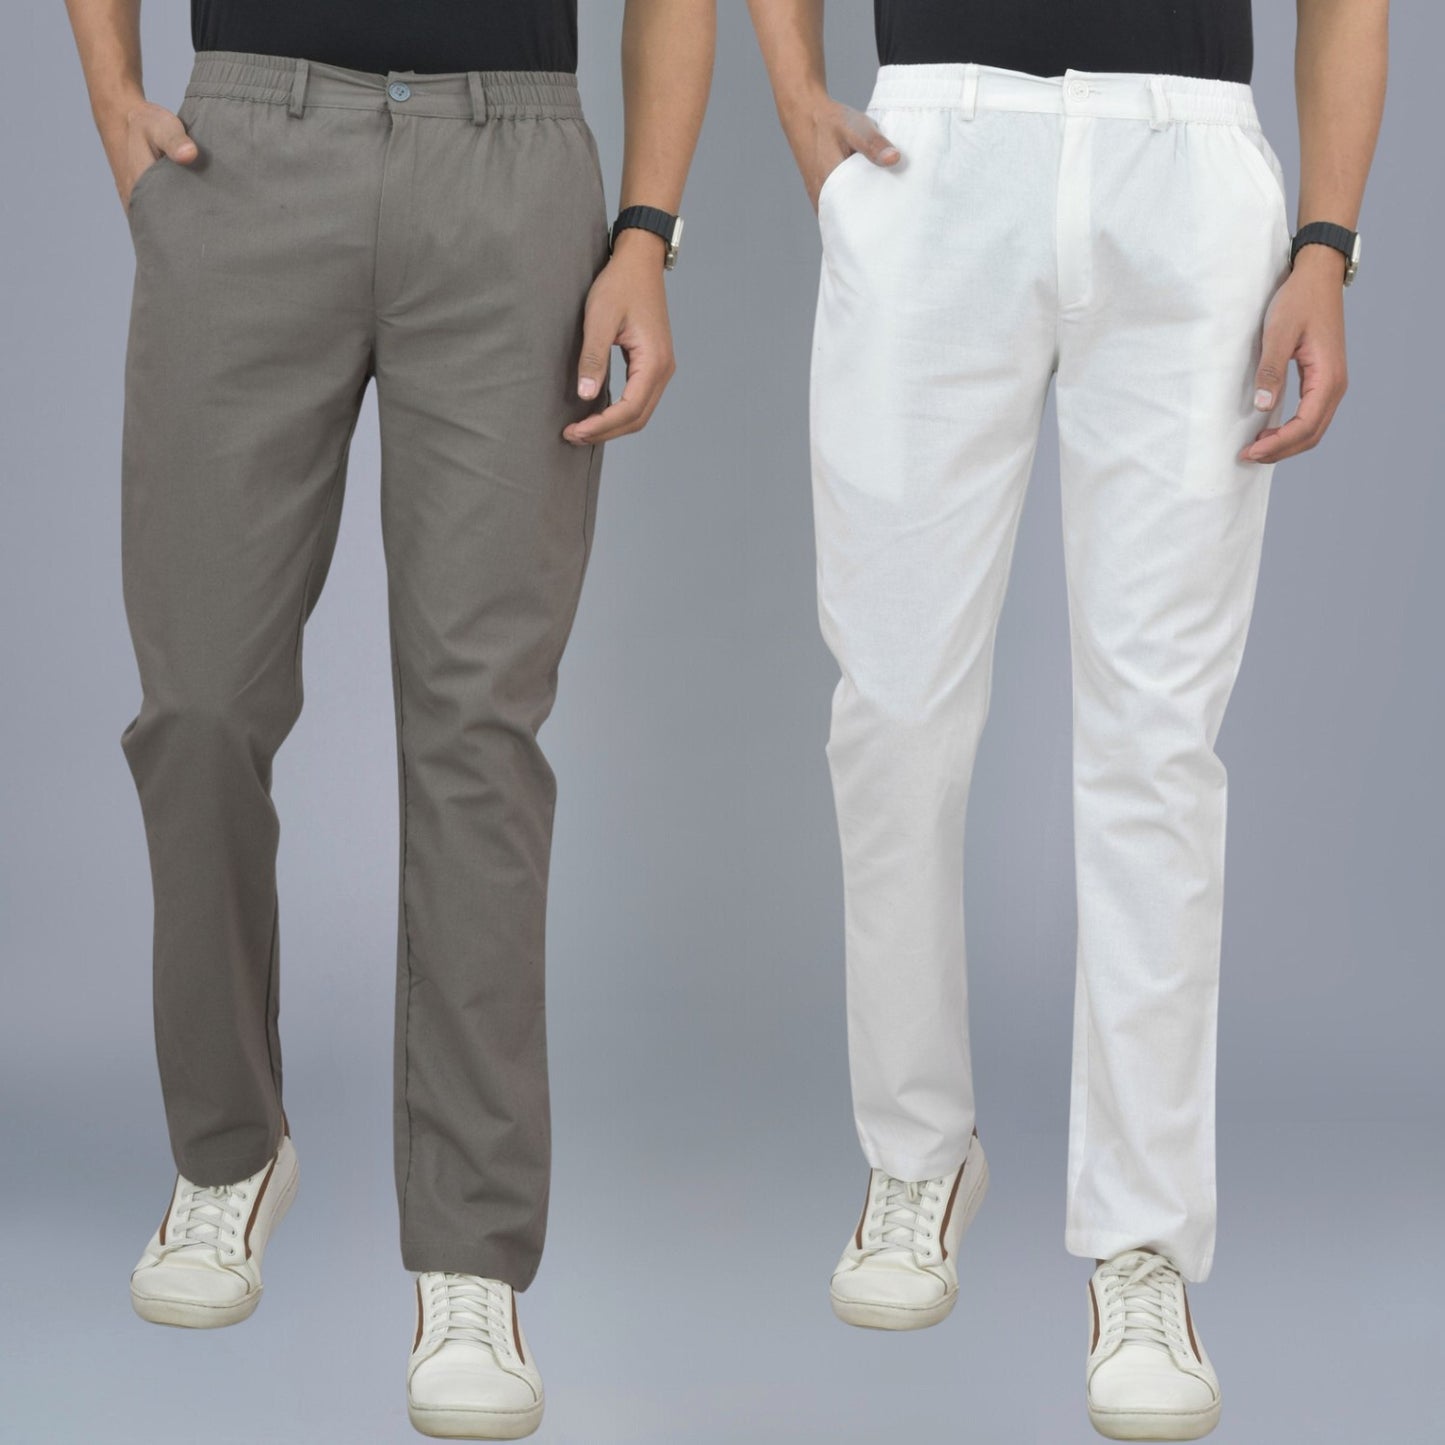 Pack Of 2 Grey And White Airy Linen Summer Cool Cotton Comfort Pants For Men